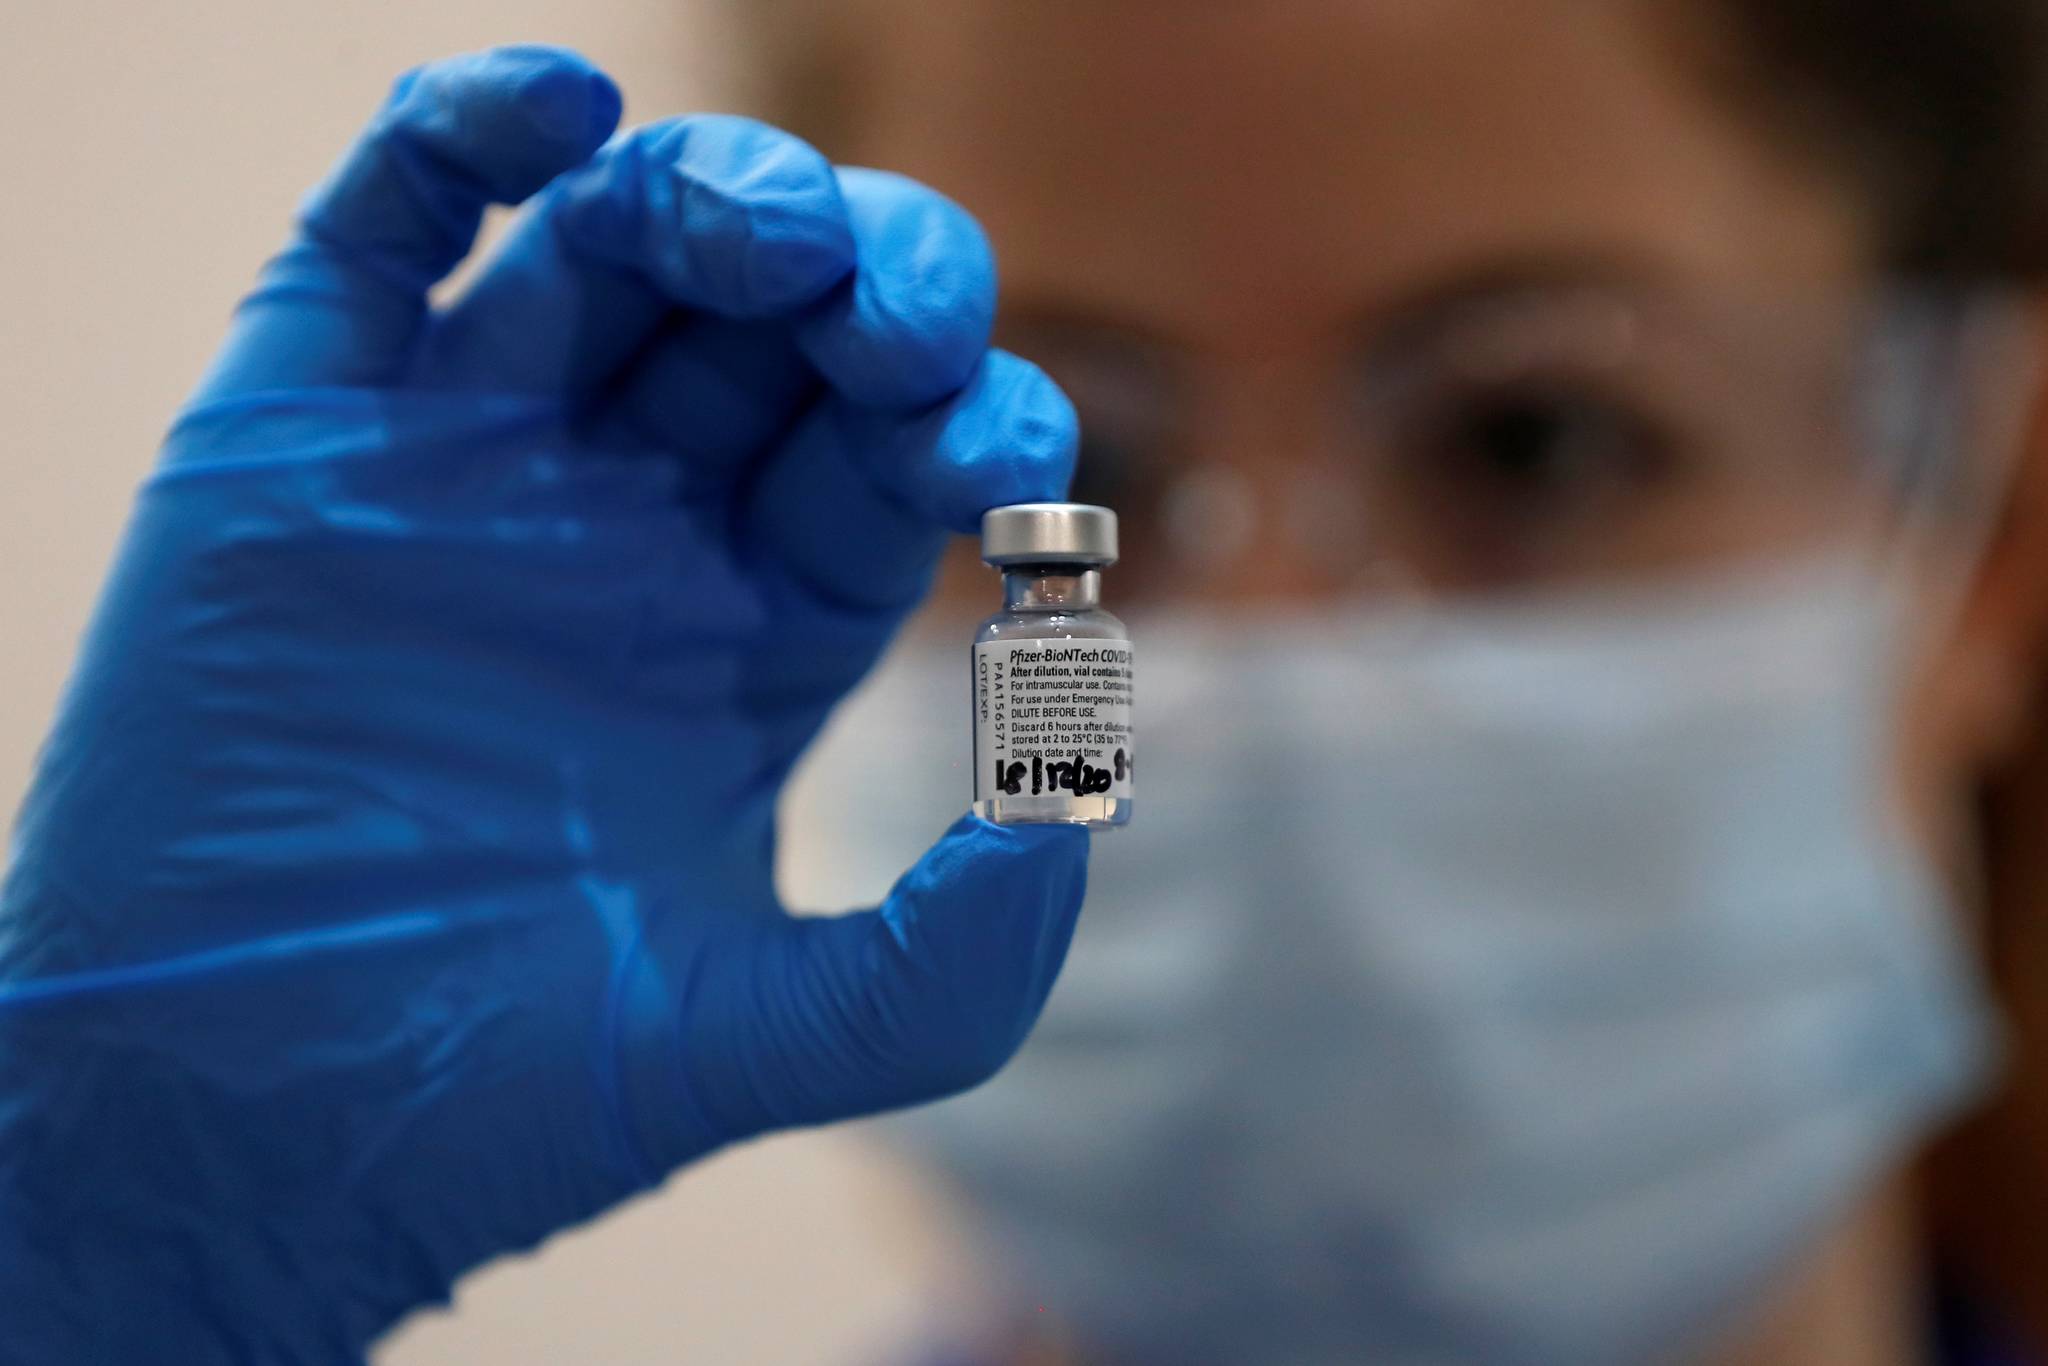 A nurse holds a phial of the Pfizer-BioNTech COVID-19 vaccine at Guy’s Hospital in London, Tuesday, Dec. 8, 2020, as the U.K. health authorities rolled out a national mass vaccination program. U.K. regulators said Wednesday Dec. 9, 2020, that people who have a “significant history’’ of allergic reactions shouldn’t receive the new Pfizer/BioNTech vaccine while they investigate two adverse reactions that occurred on the first day of the country’s mass vaccination program. (AP Photo/Frank Augstein, Pool)